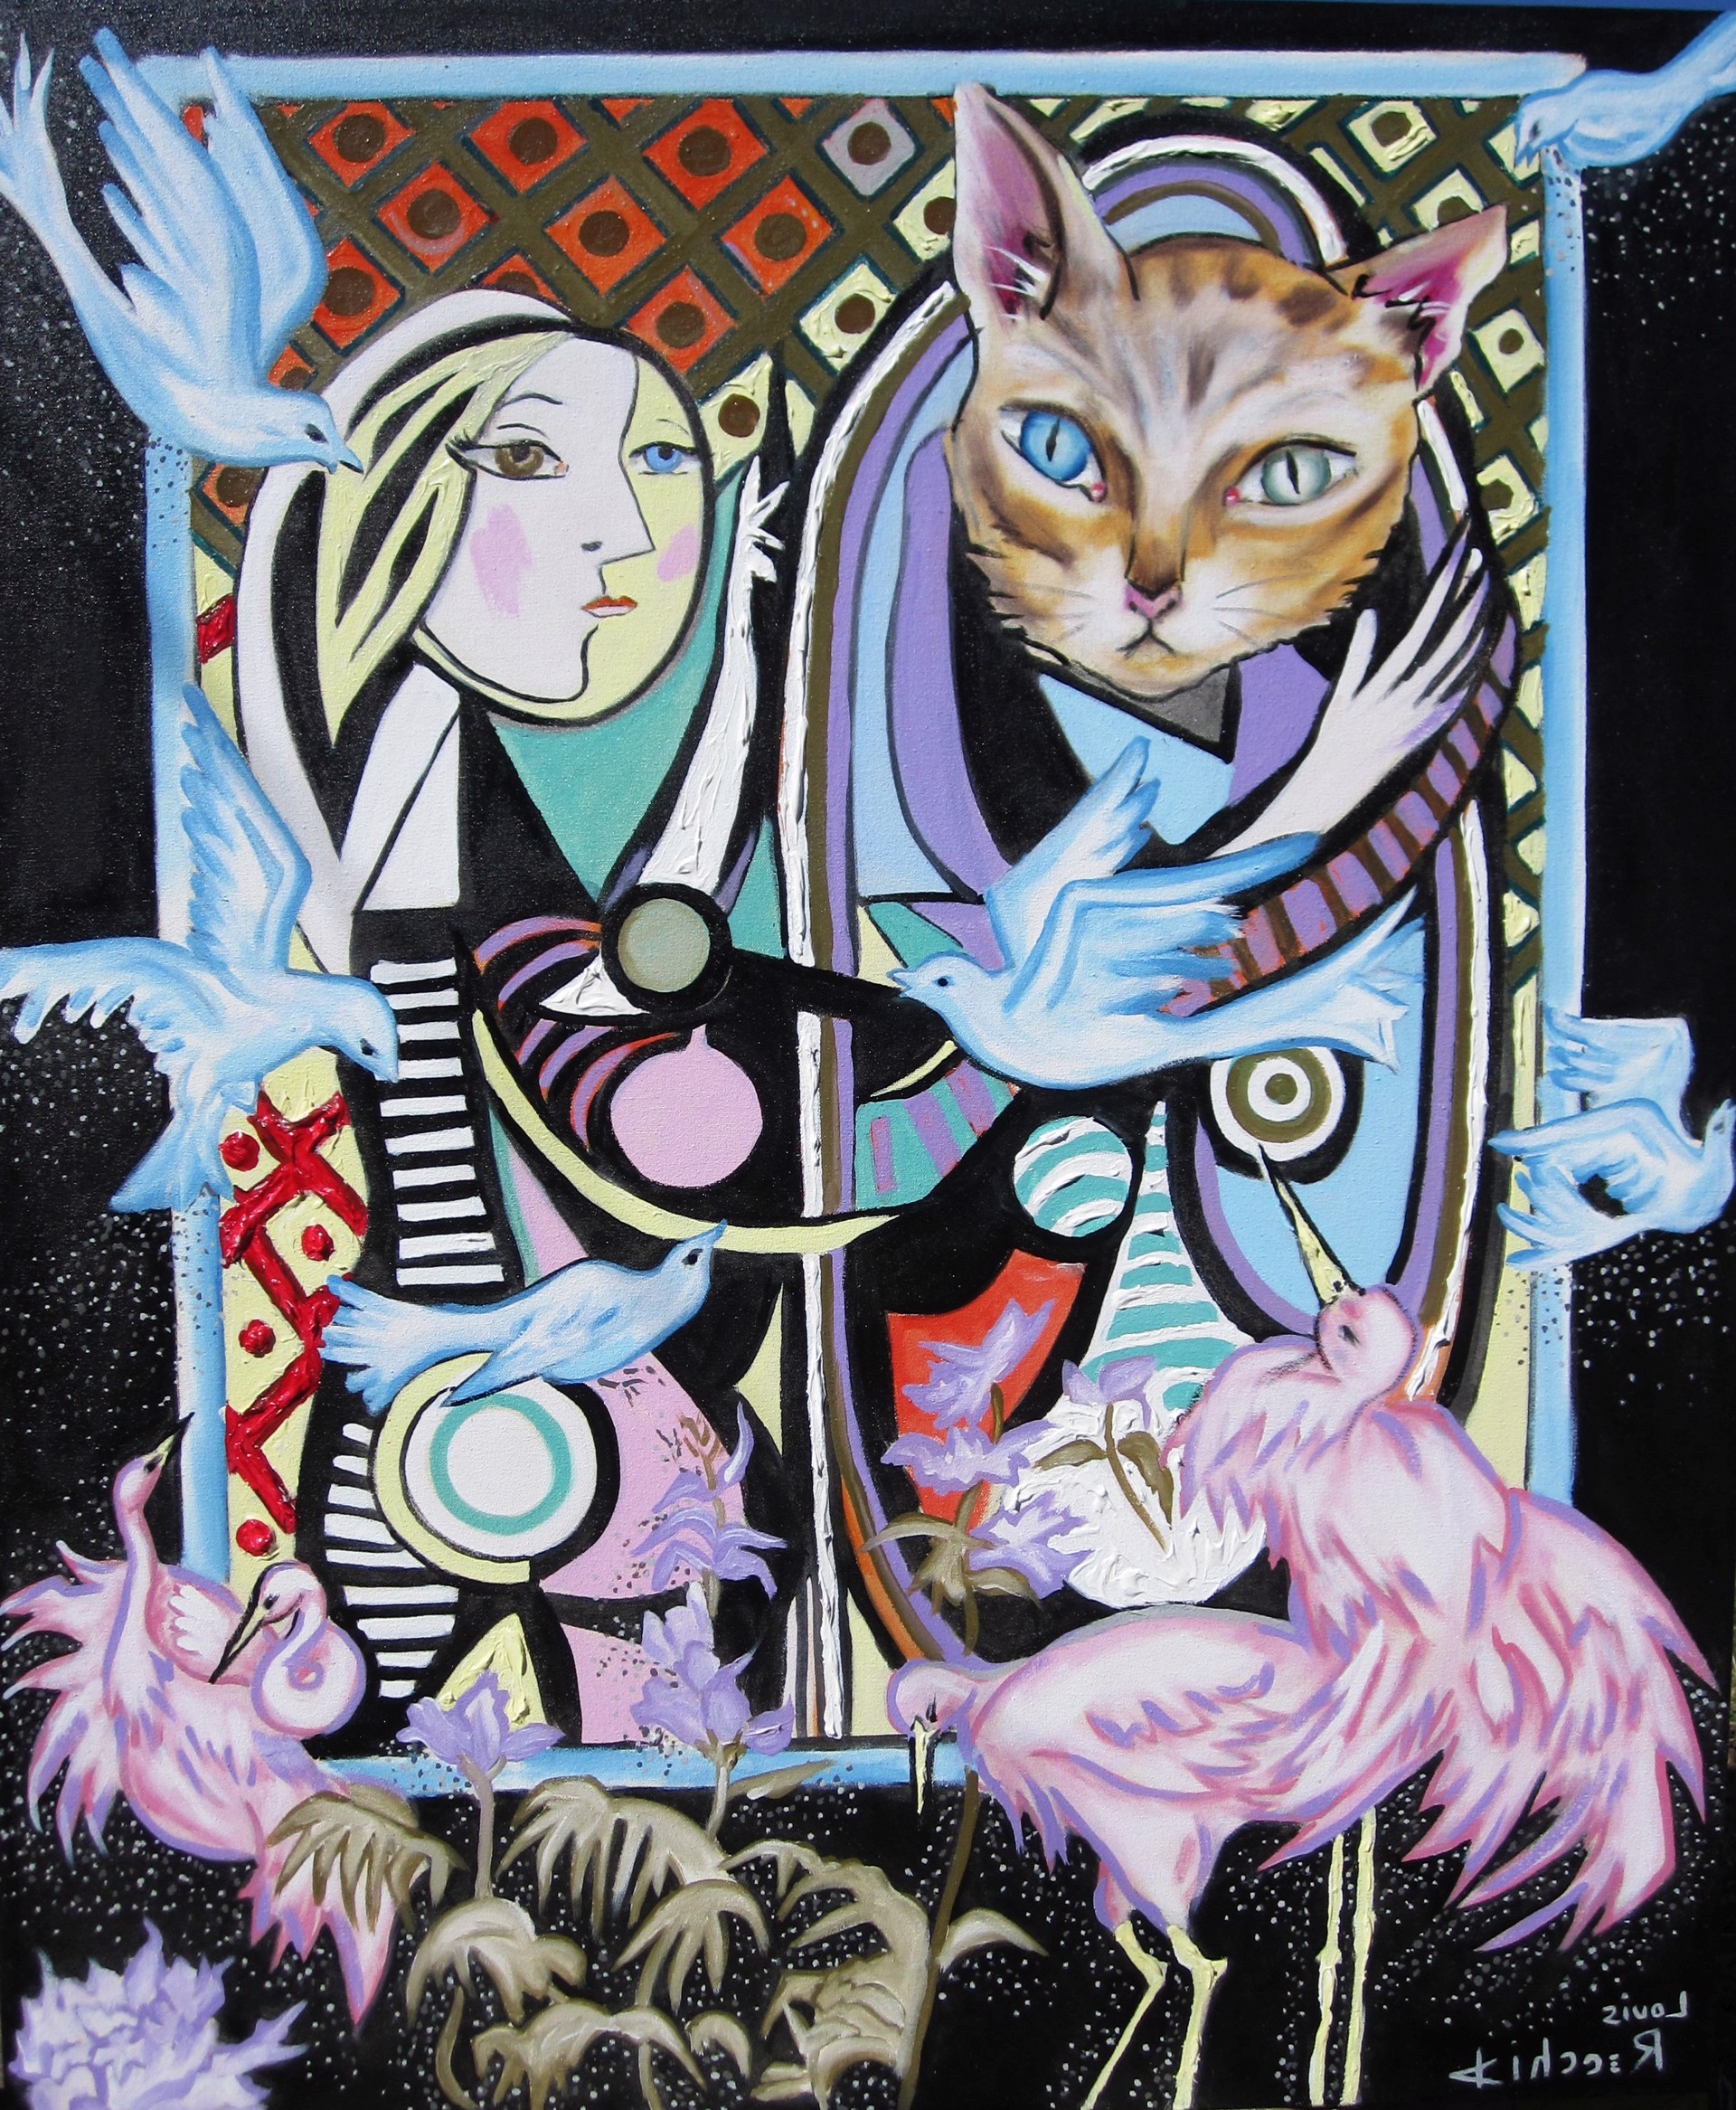 Picasso's Mirror with Cat by Louis Recchia